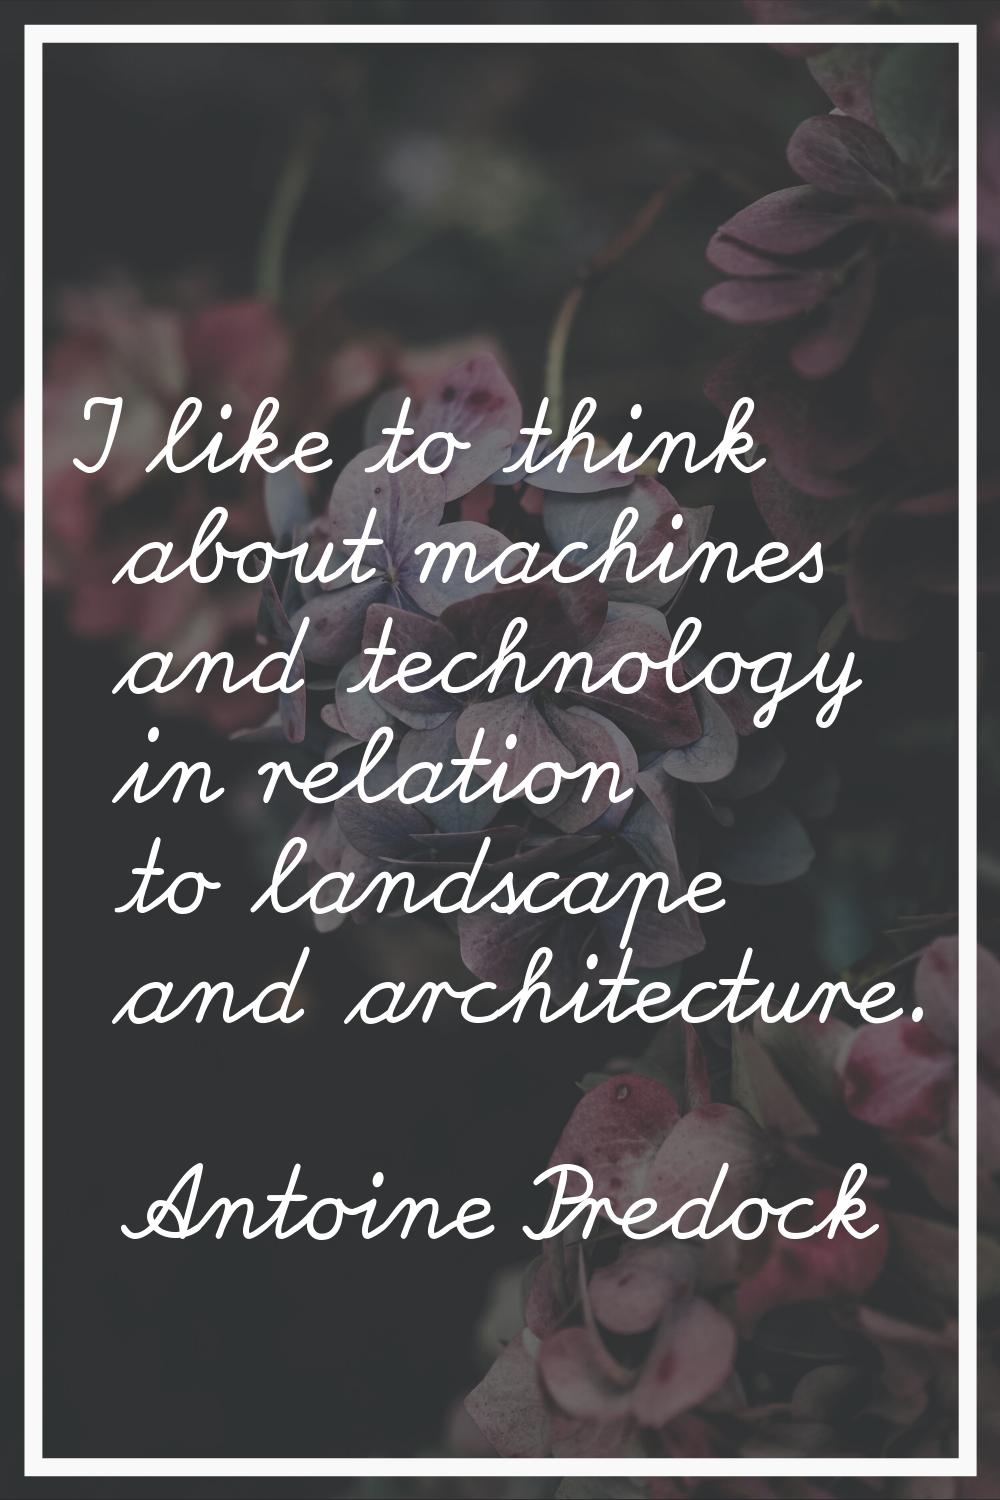 I like to think about machines and technology in relation to landscape and architecture.